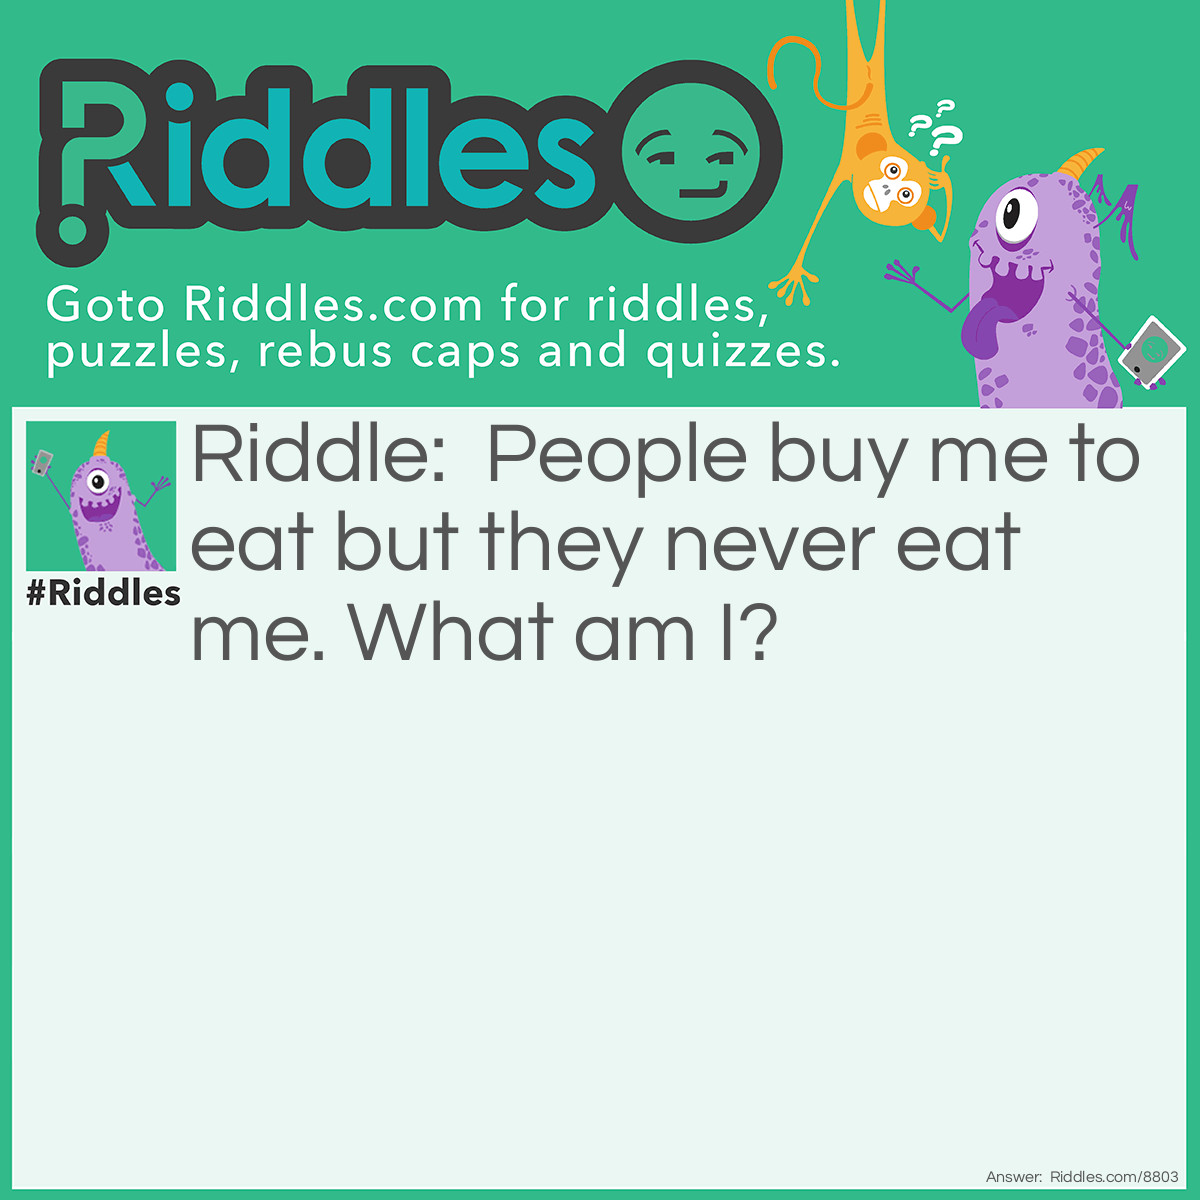 Riddle: People buy me to eat but they never eat me. What am I? Answer: A plate